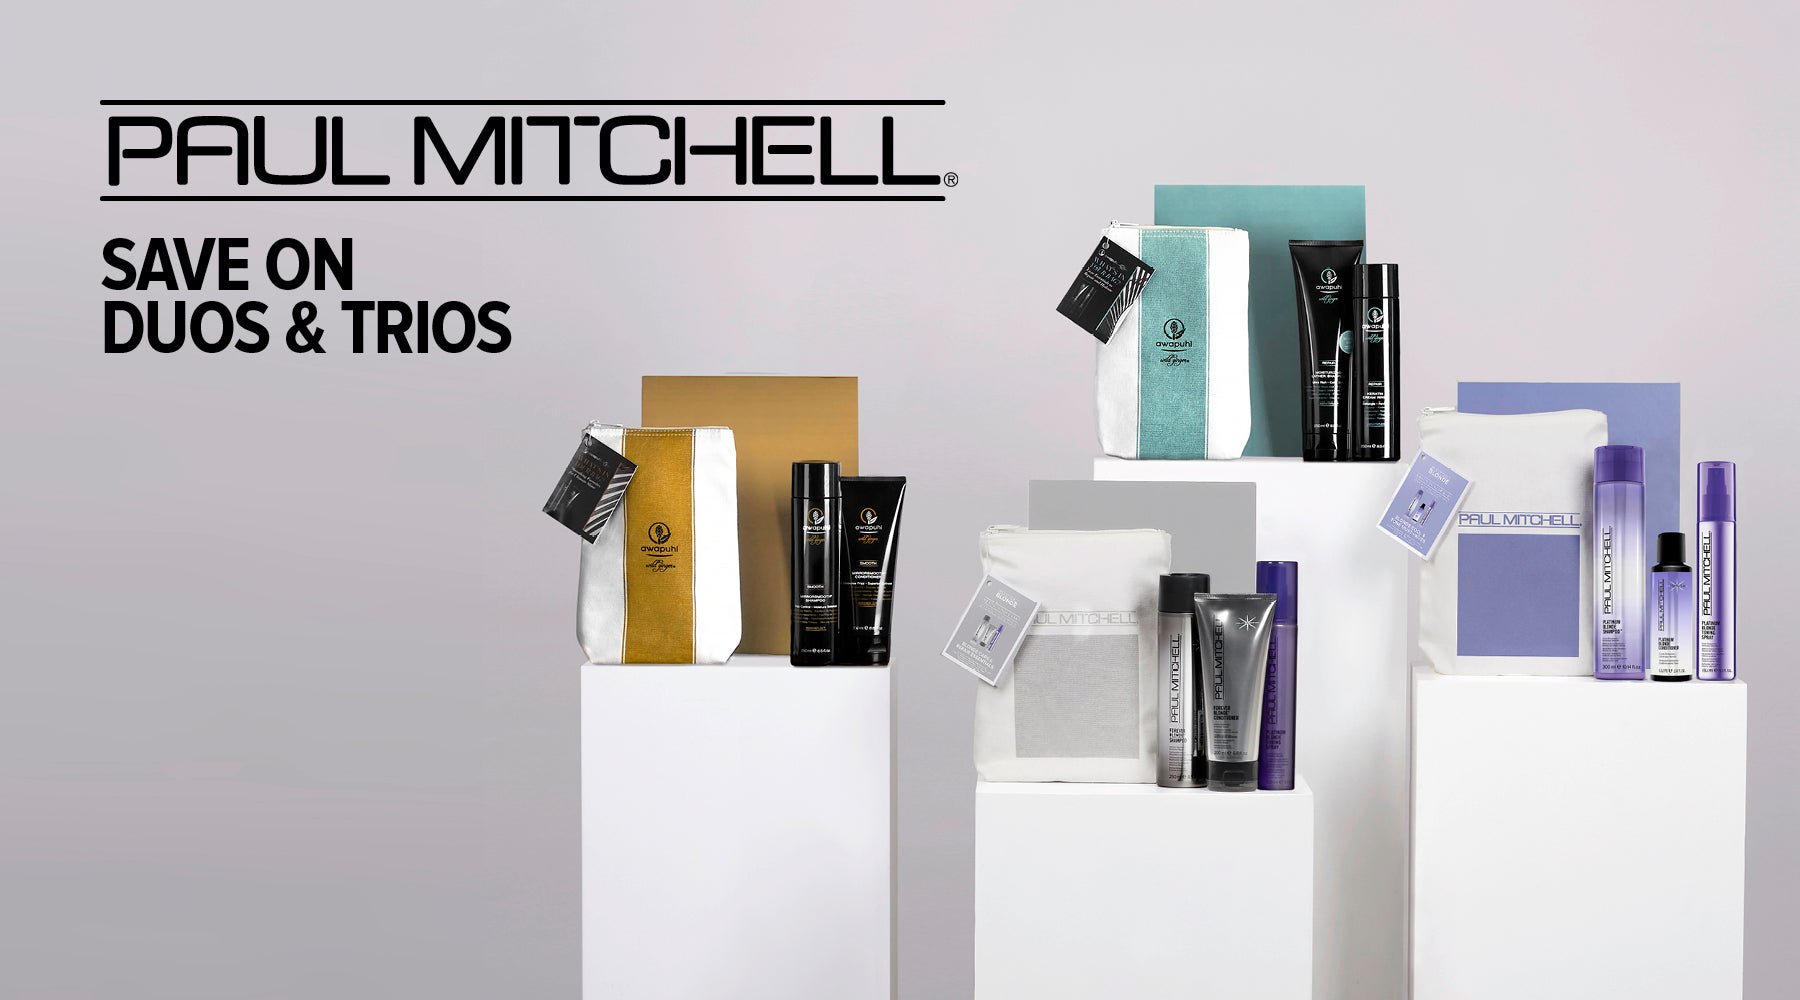 What's in your bag - Paul Mitchell